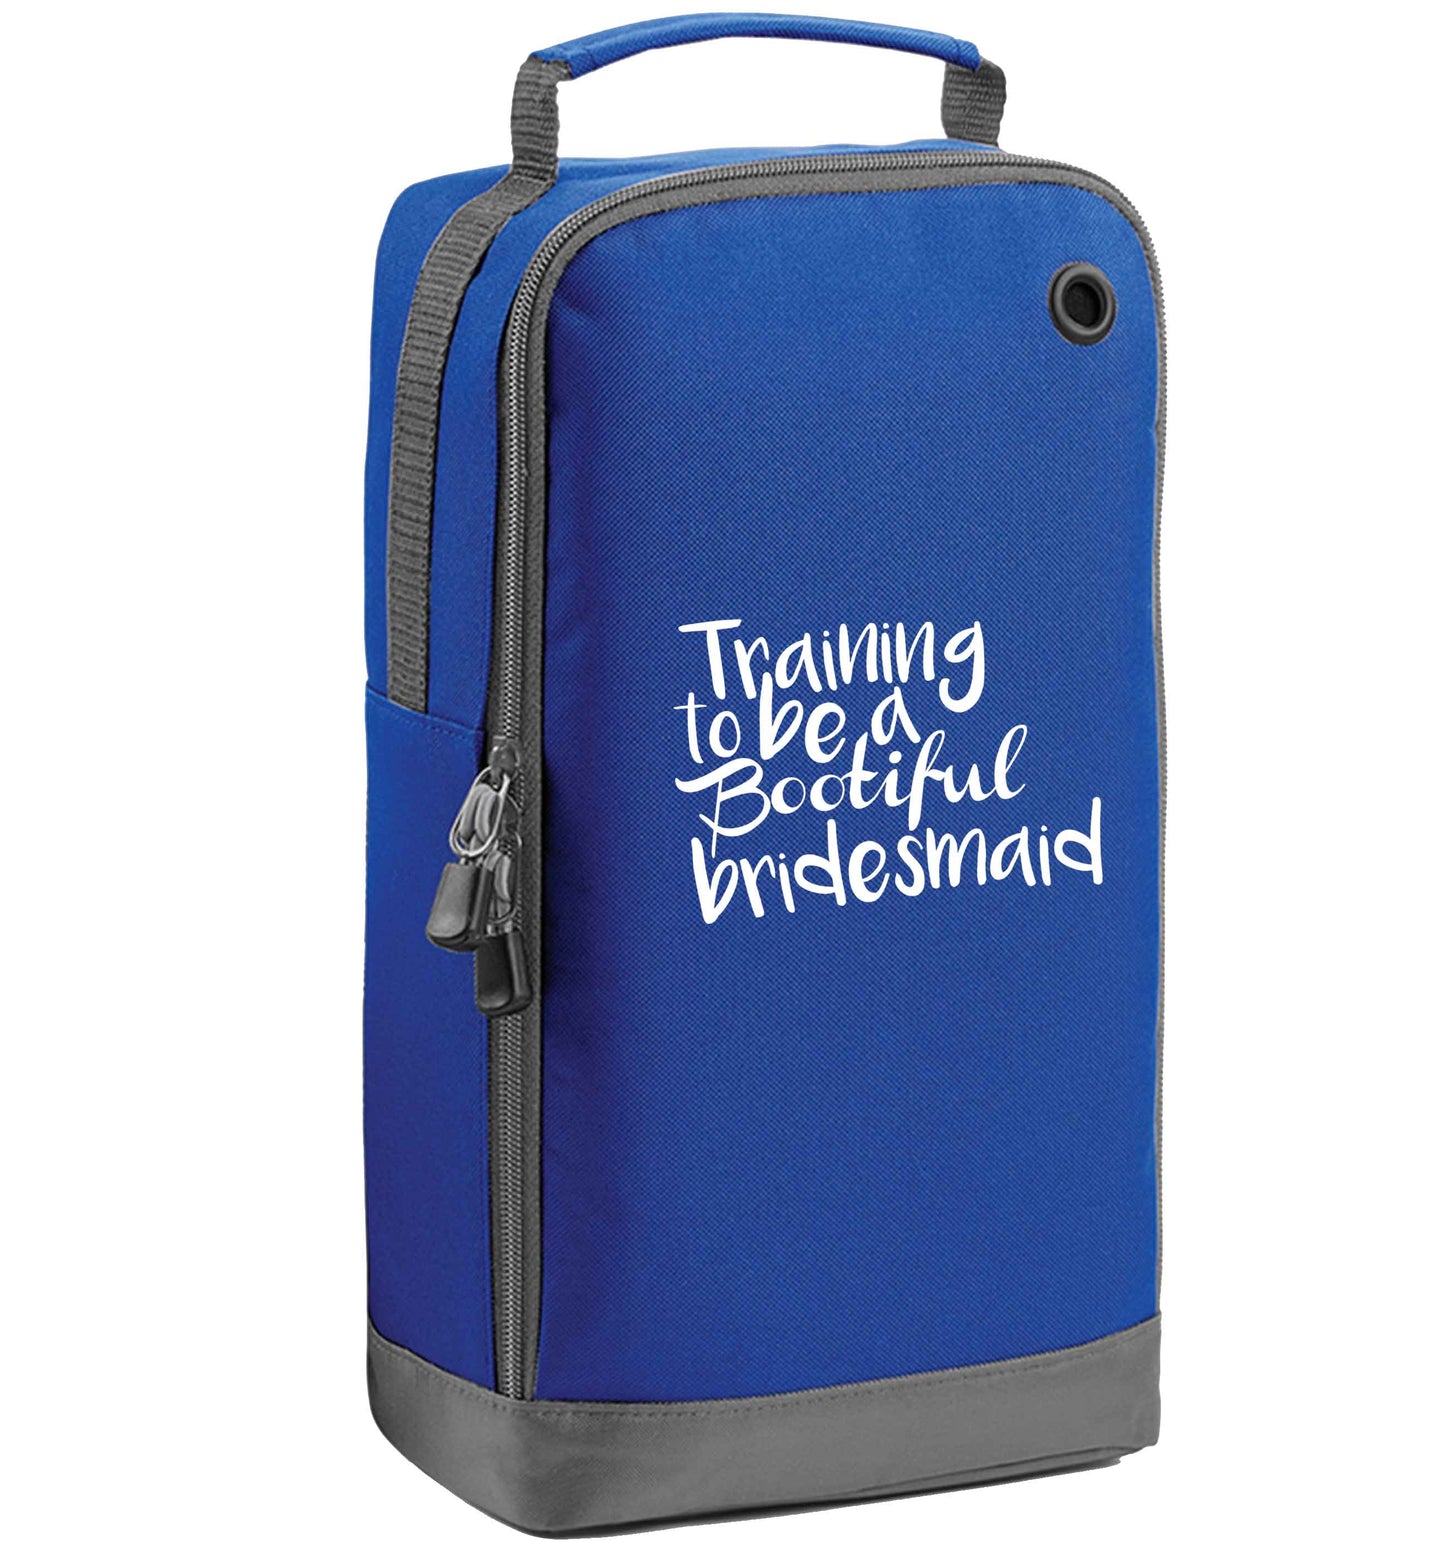 Get motivated and get fit for your big day! Our workout quotes and designs will get you ready to sweat! Perfect for any bride, groom or bridesmaid to be!  blue sports shoe bag vertical print